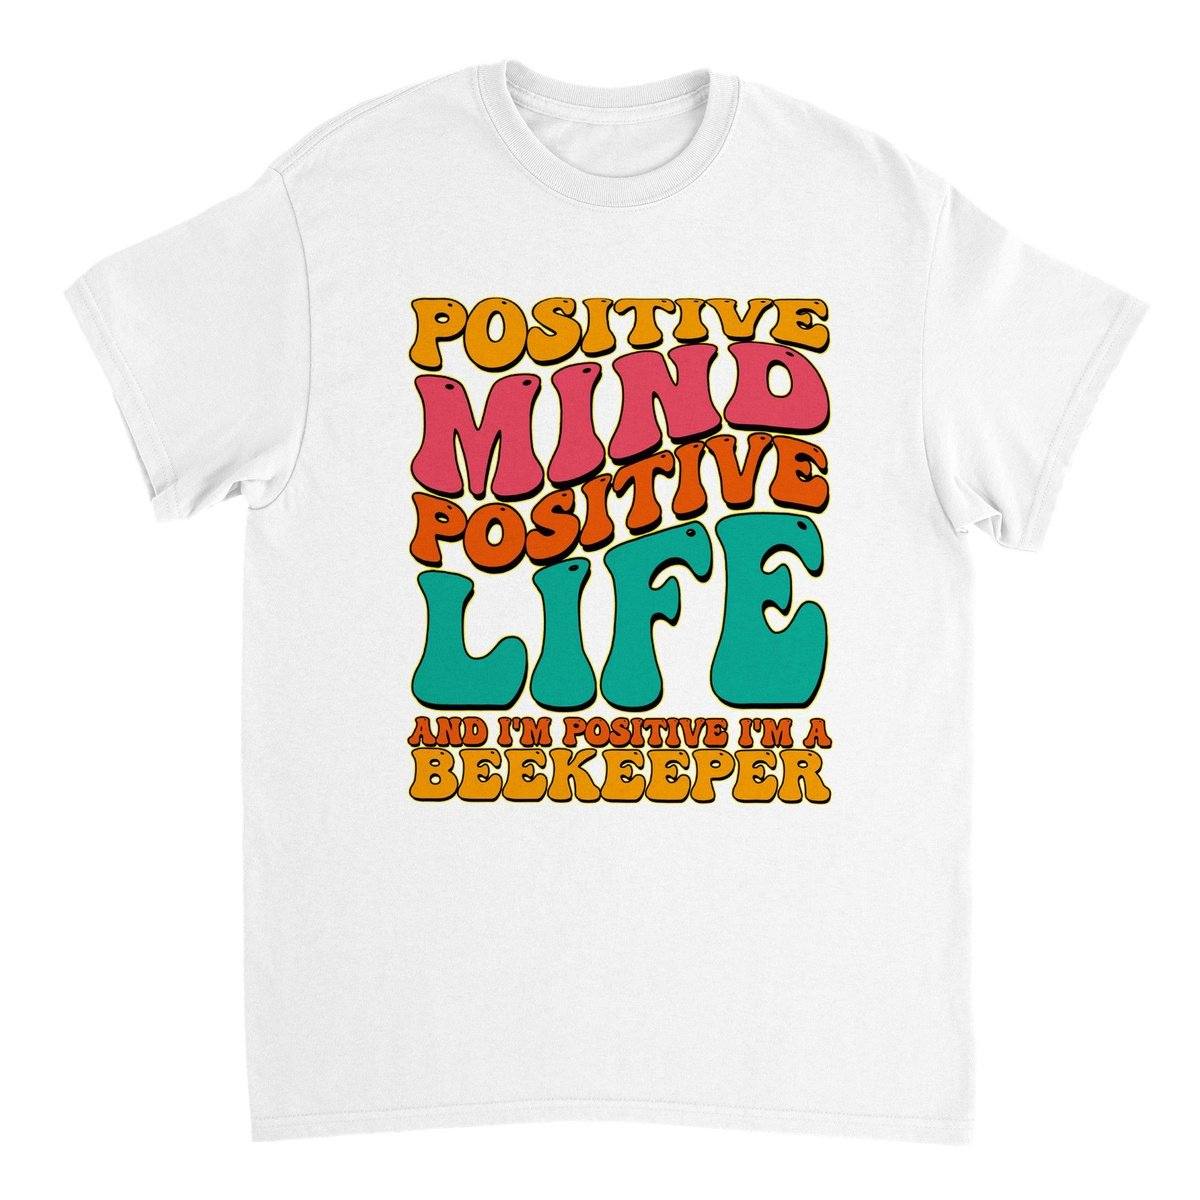 Positive Mind Positive Kid And Im Positive Im a Beekeeper  T-Shirt - Funny Bee Good Vibes 70's Groovy Tshirt - Unisex Crewneck T-shirt Australia Online Color White / S